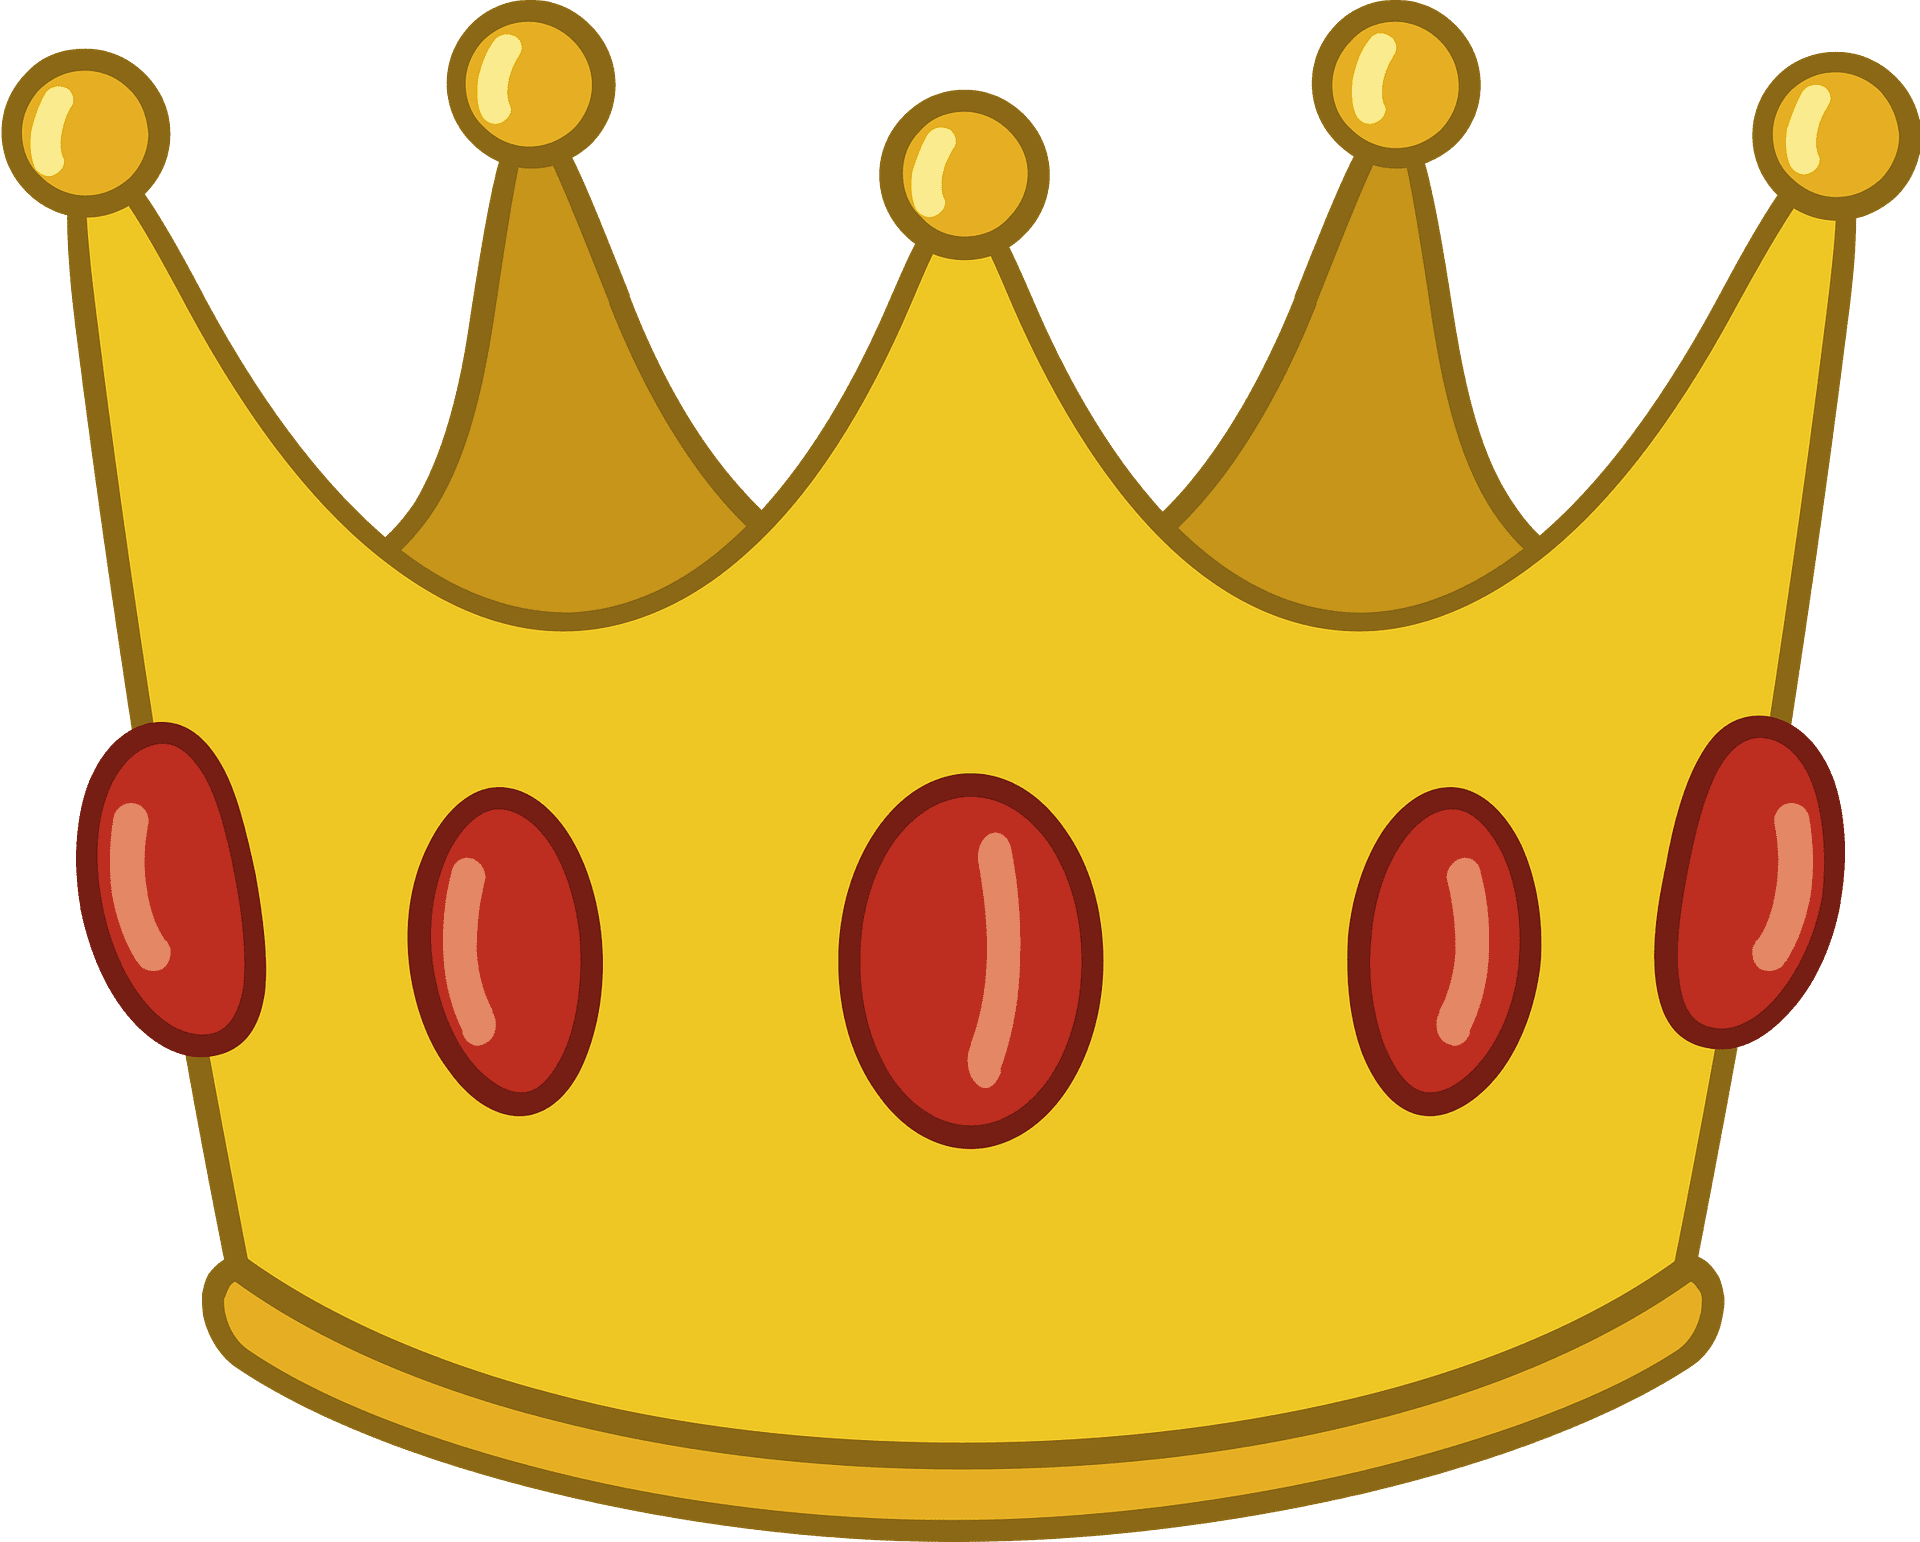 Queen crown clipart picture